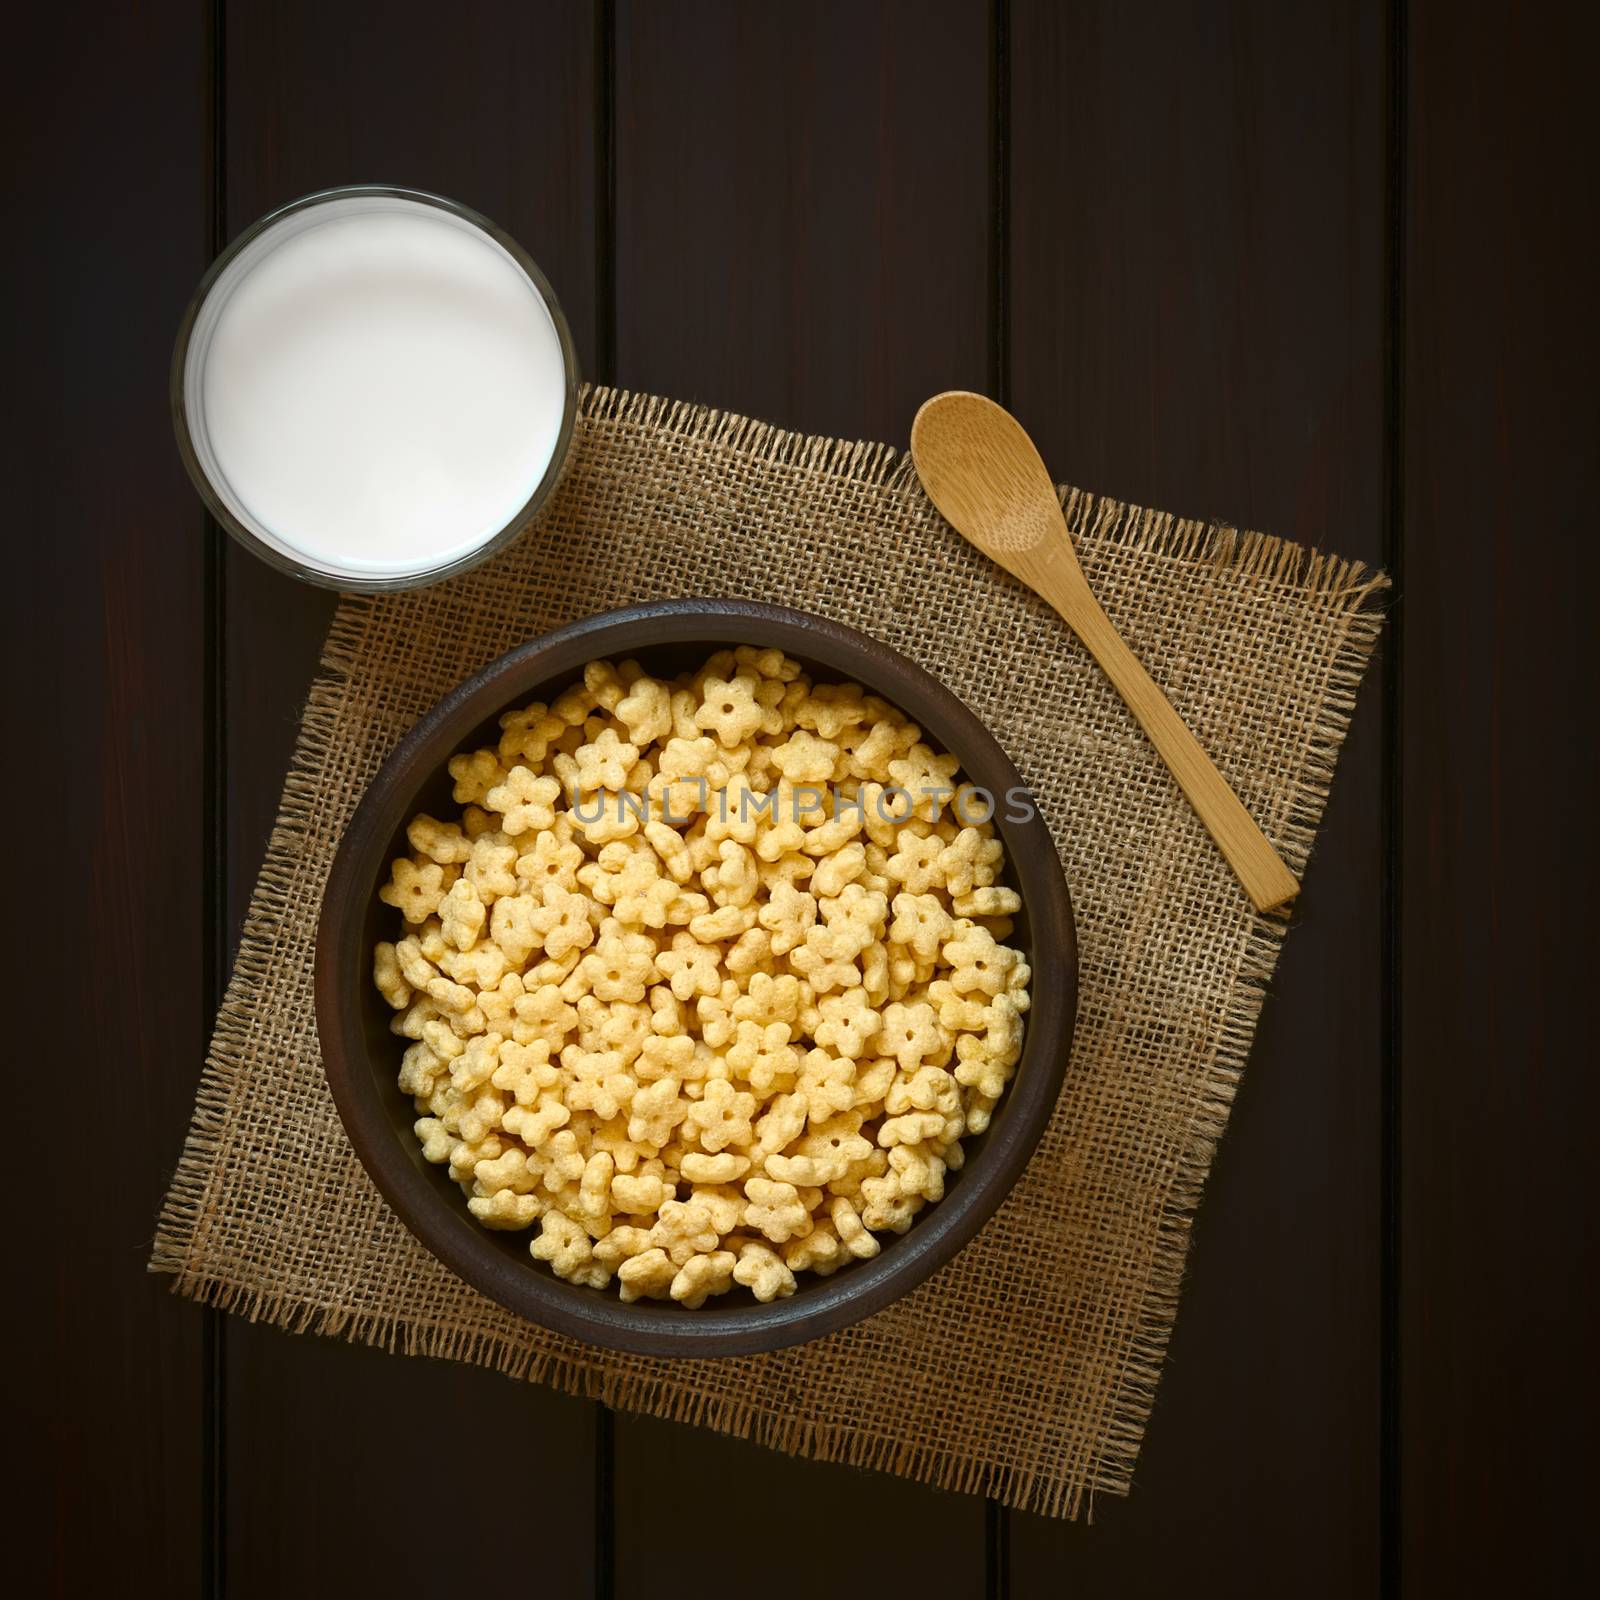 Honey Flavored Breakfast Cereal and Milk by ildi